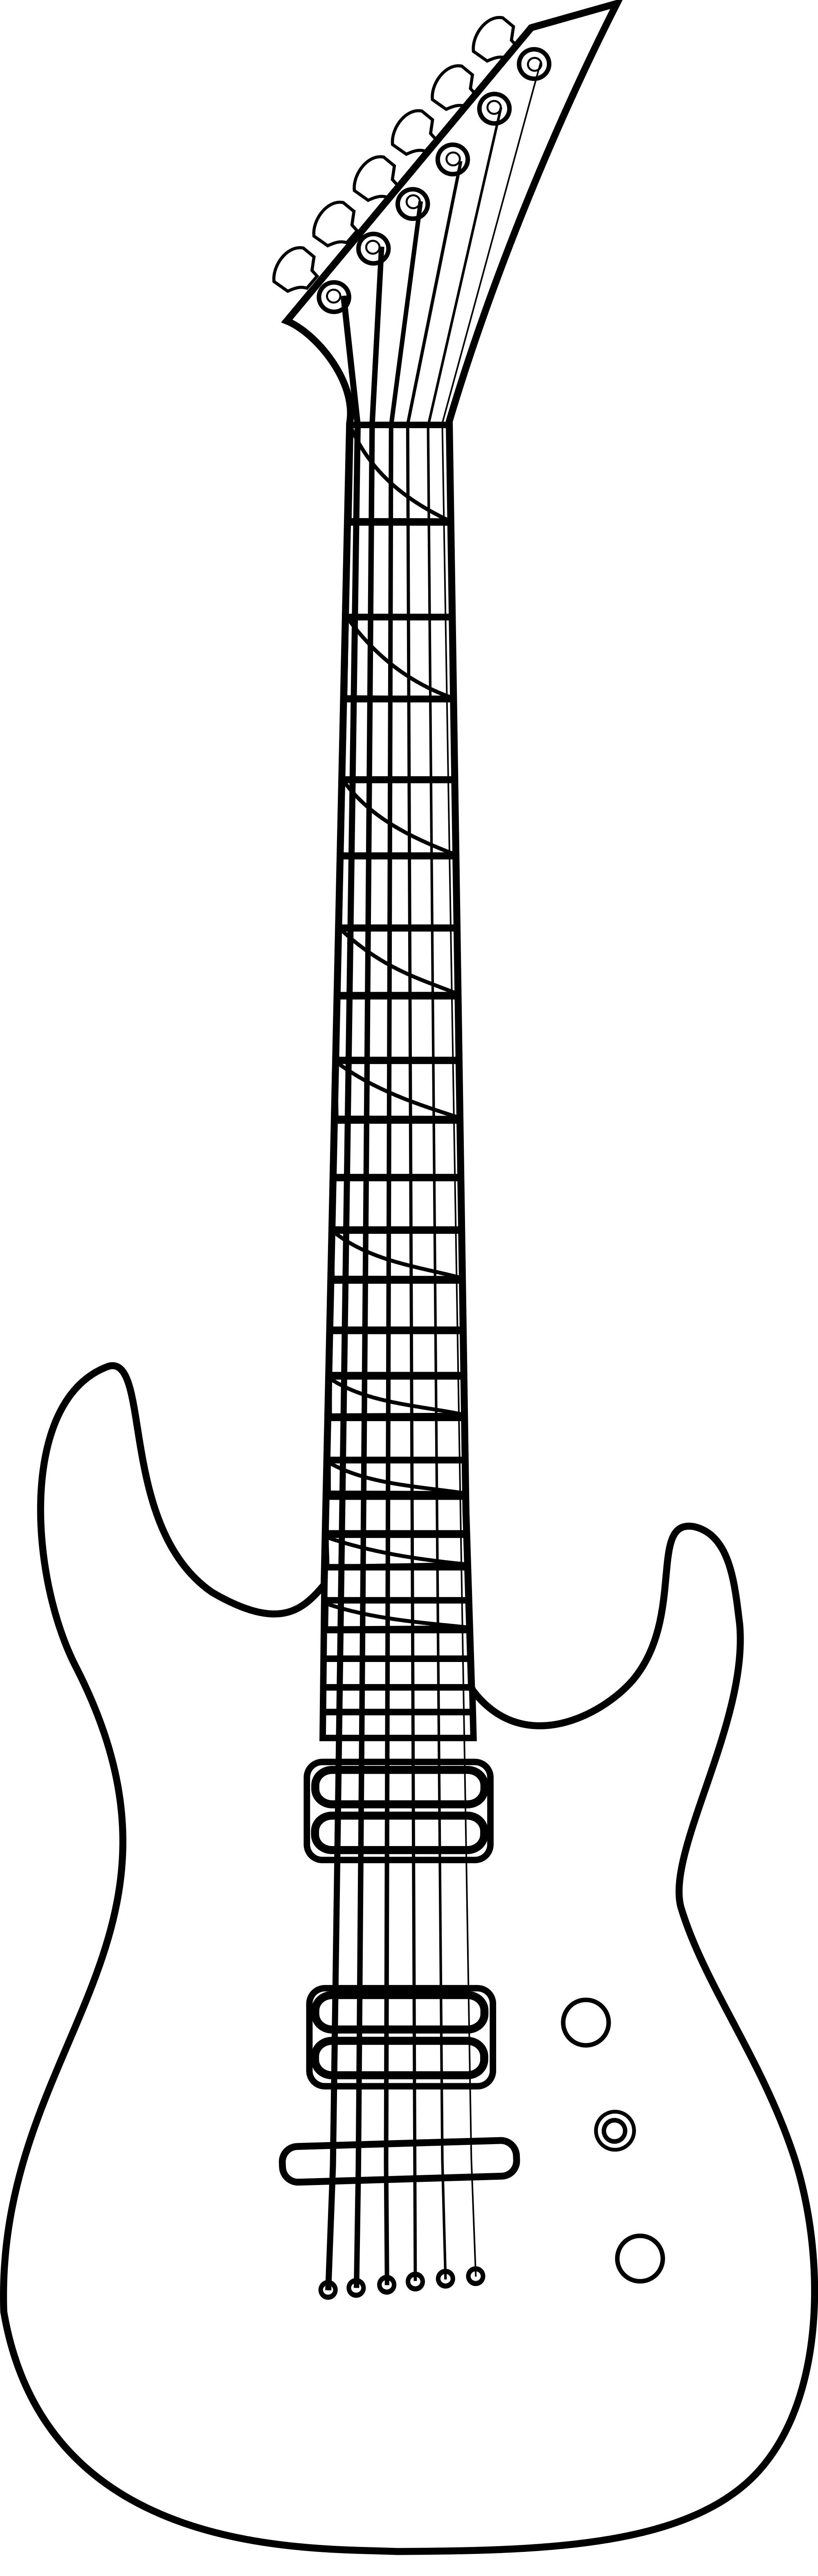 Electric Guitar Outline Drawing At PaintingValleycom Explore.